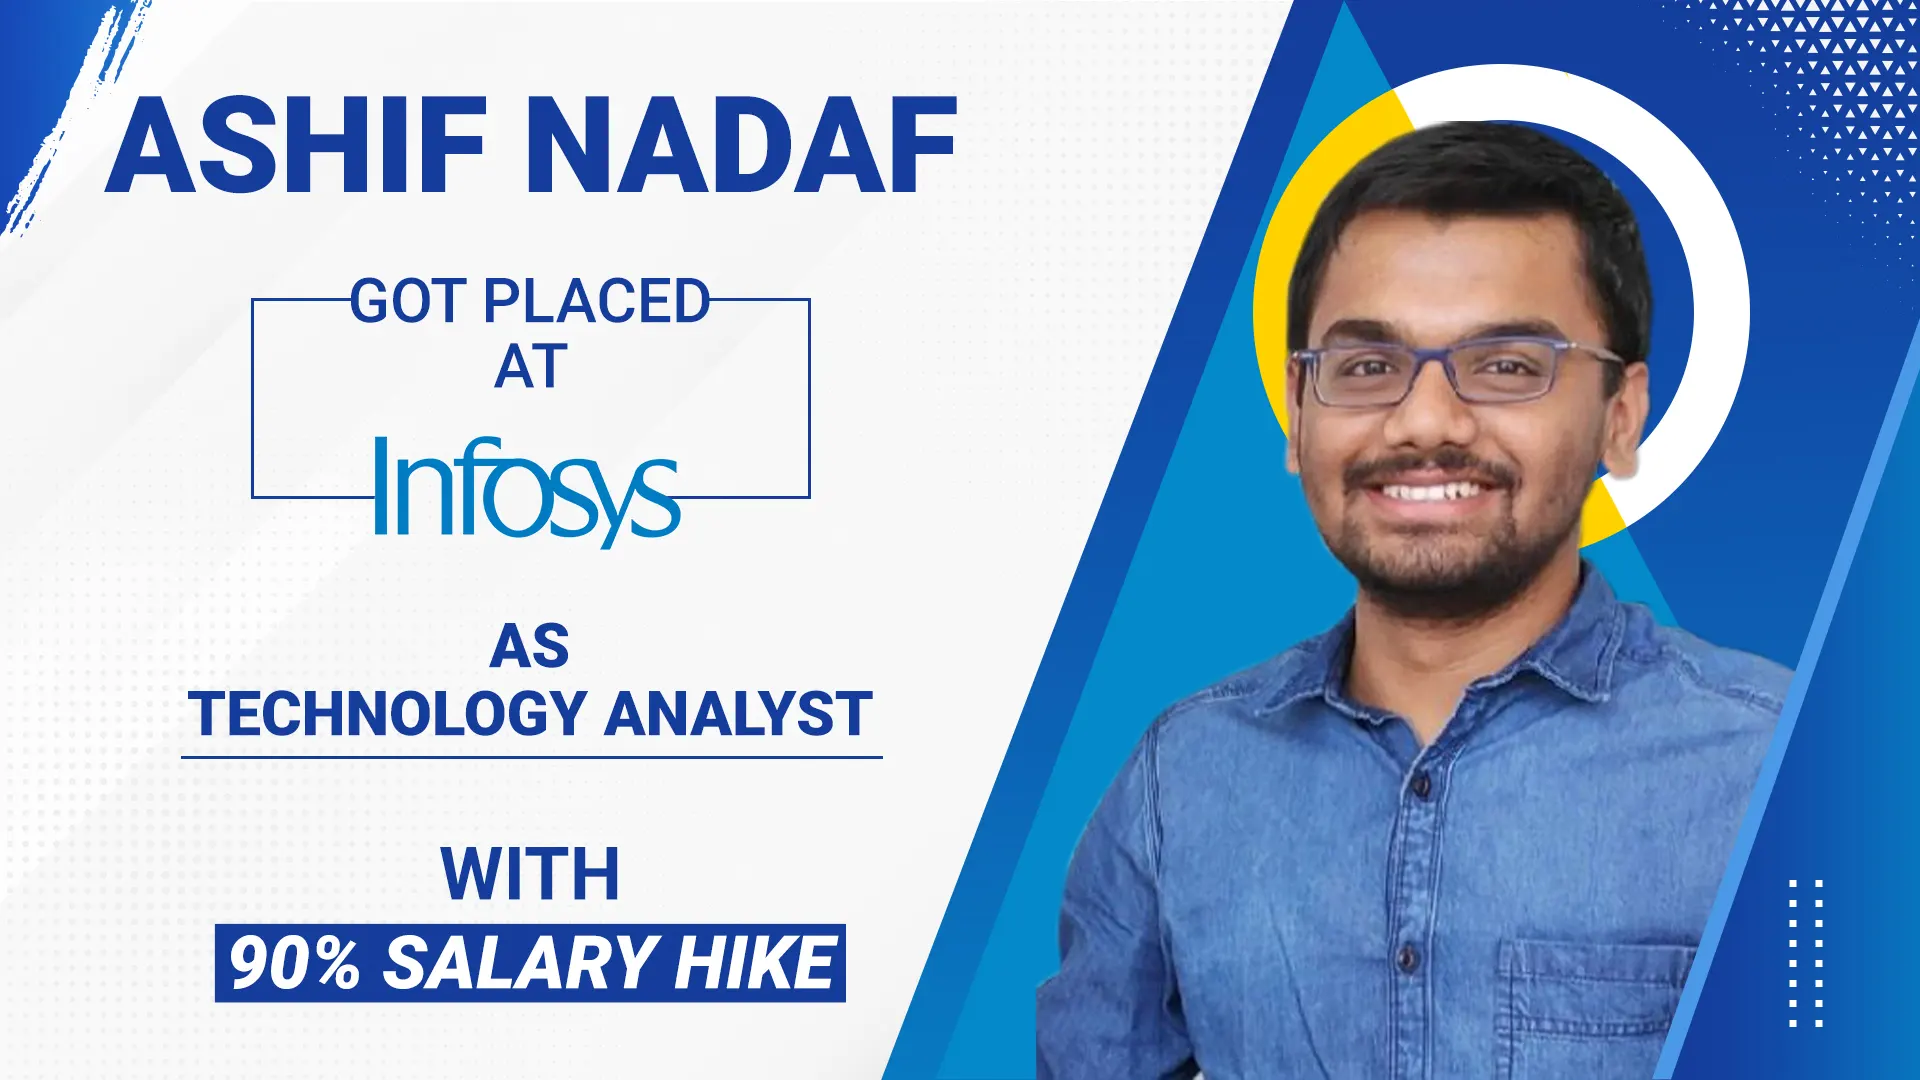 Ashif Nadaf got placed at Infosys as Technology Analyst with 90% Salary Hike